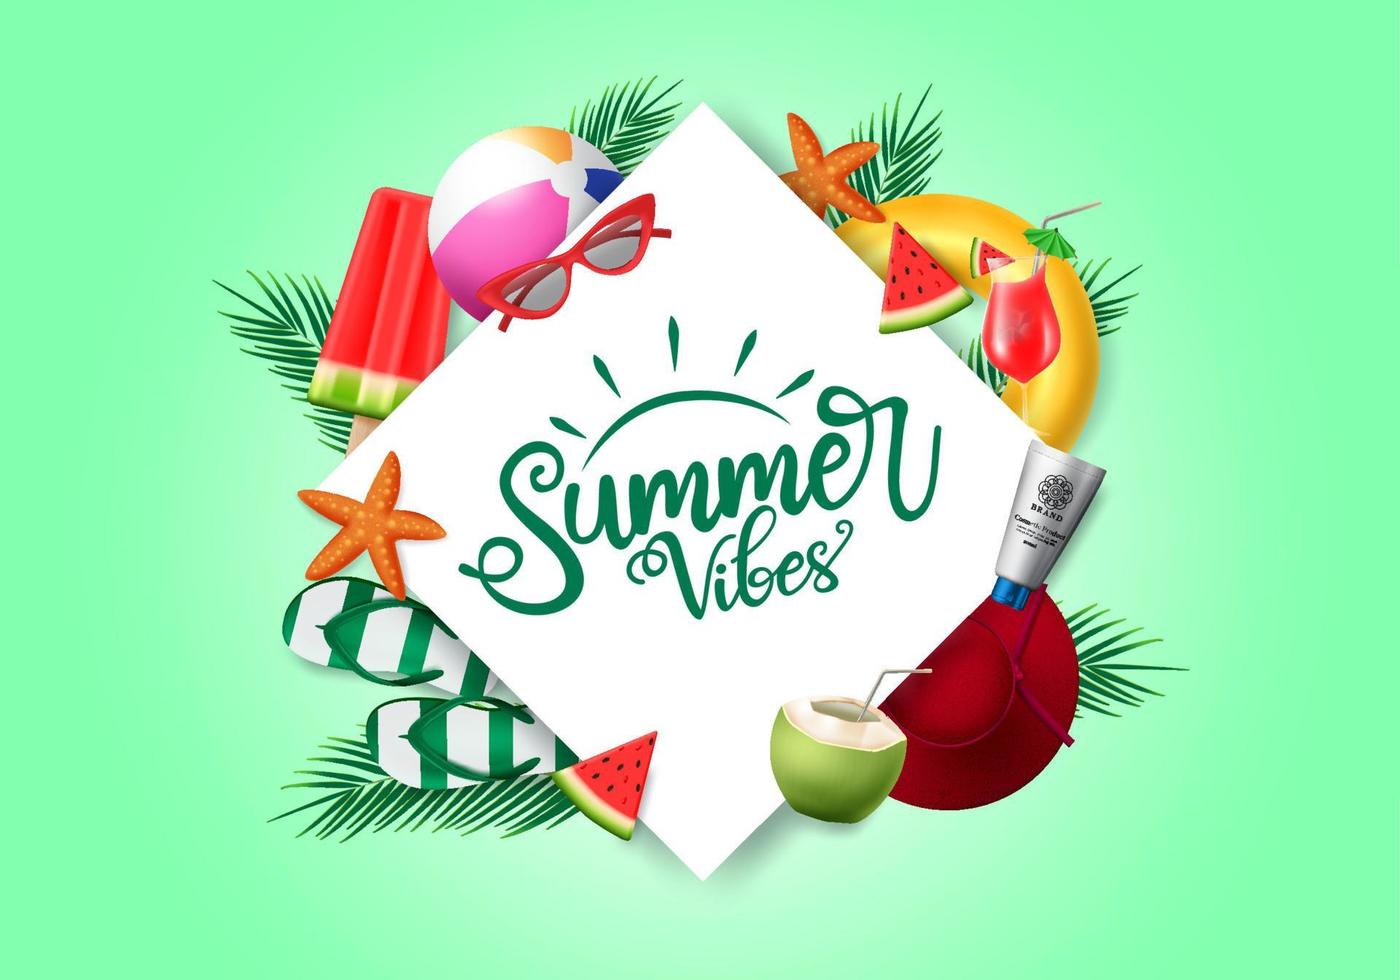 Summer vibes vector banner template. Summer vibes text with beach element of sunglasses, watermelon, hat, beach ball, floater, popsicle, and sunscreen white white frame in green background.